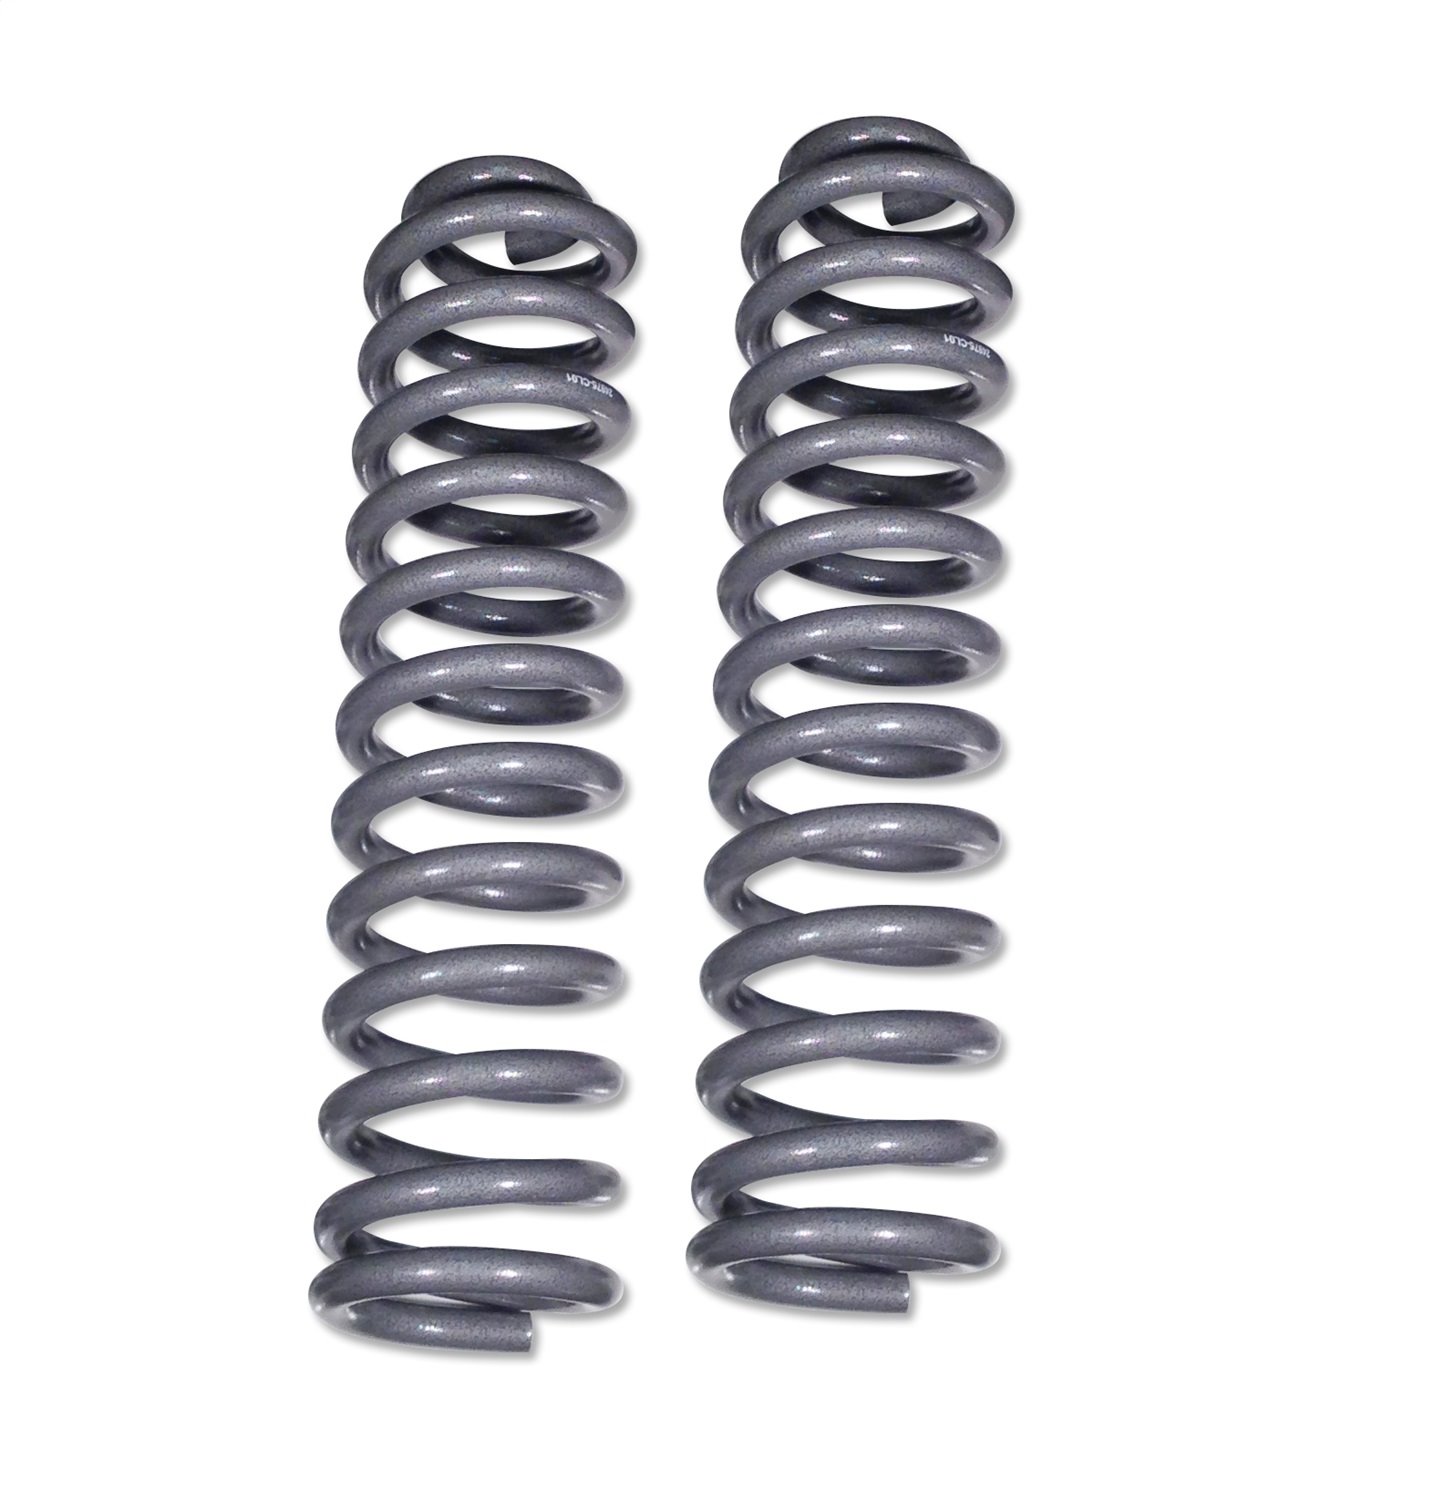 44007 Front Lift Coil Springs for 2007-2018 Jeep Wrangler JK, 4 in. Lift